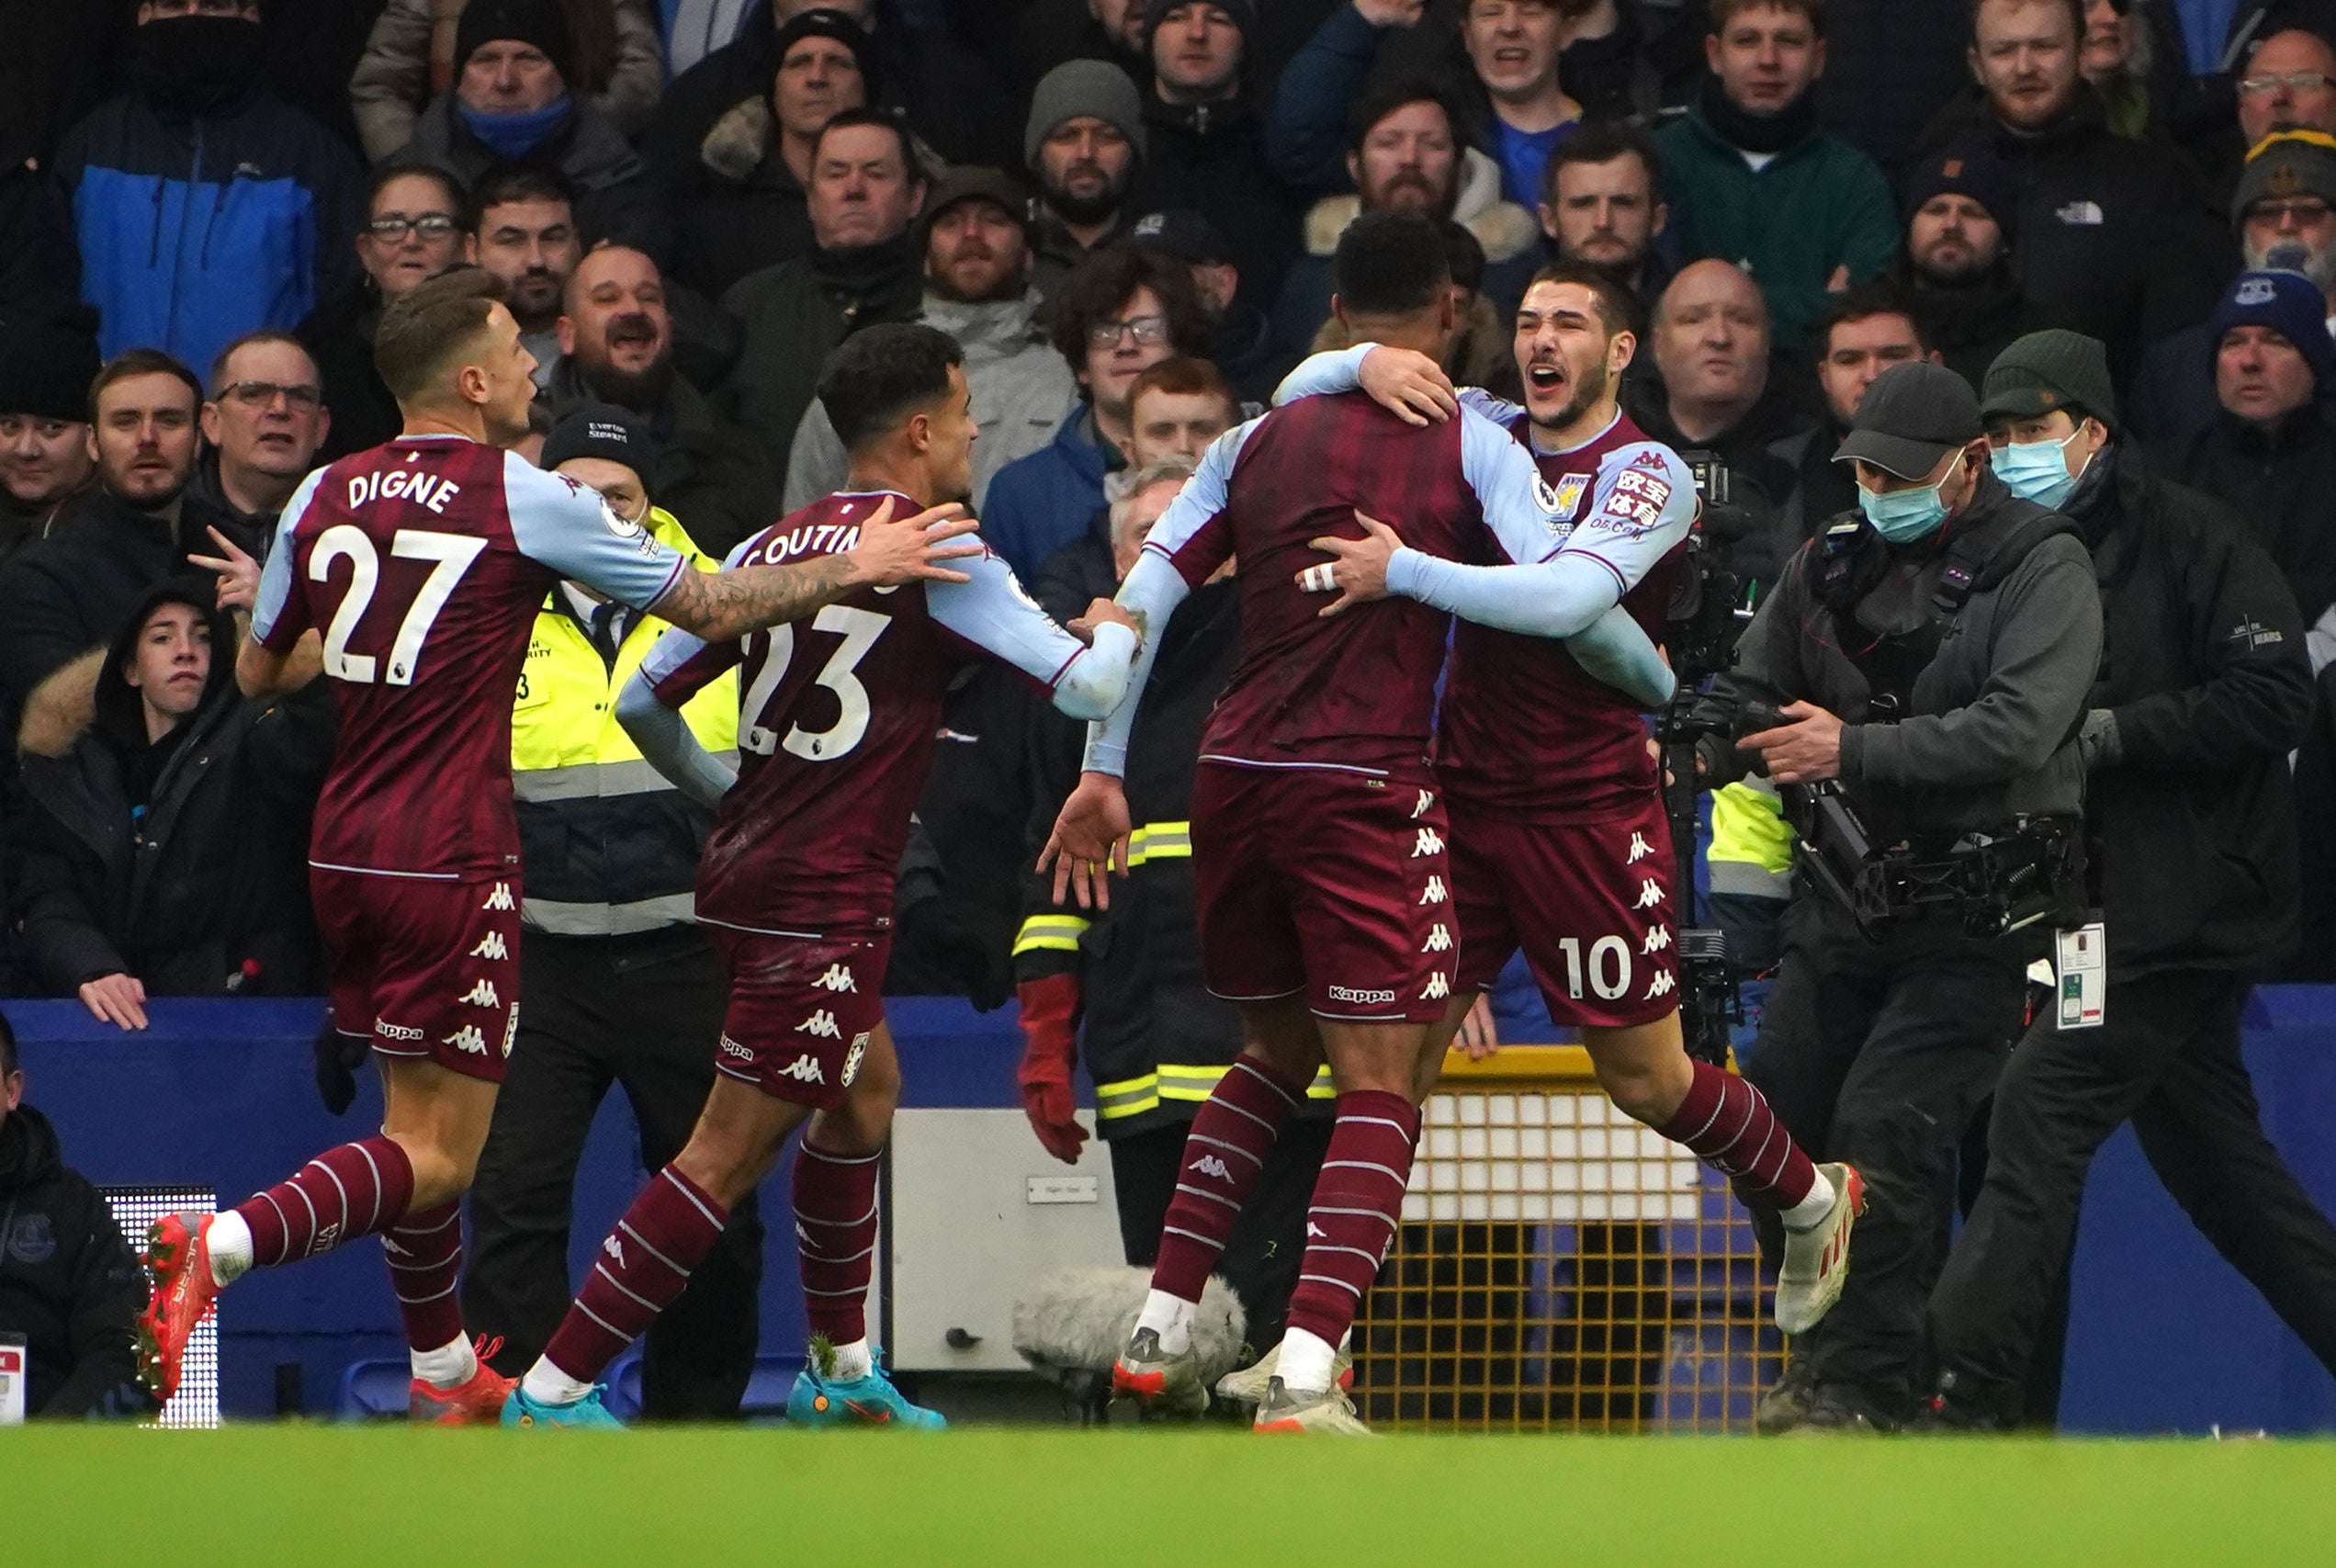 Villa celebrate the only goal of the game